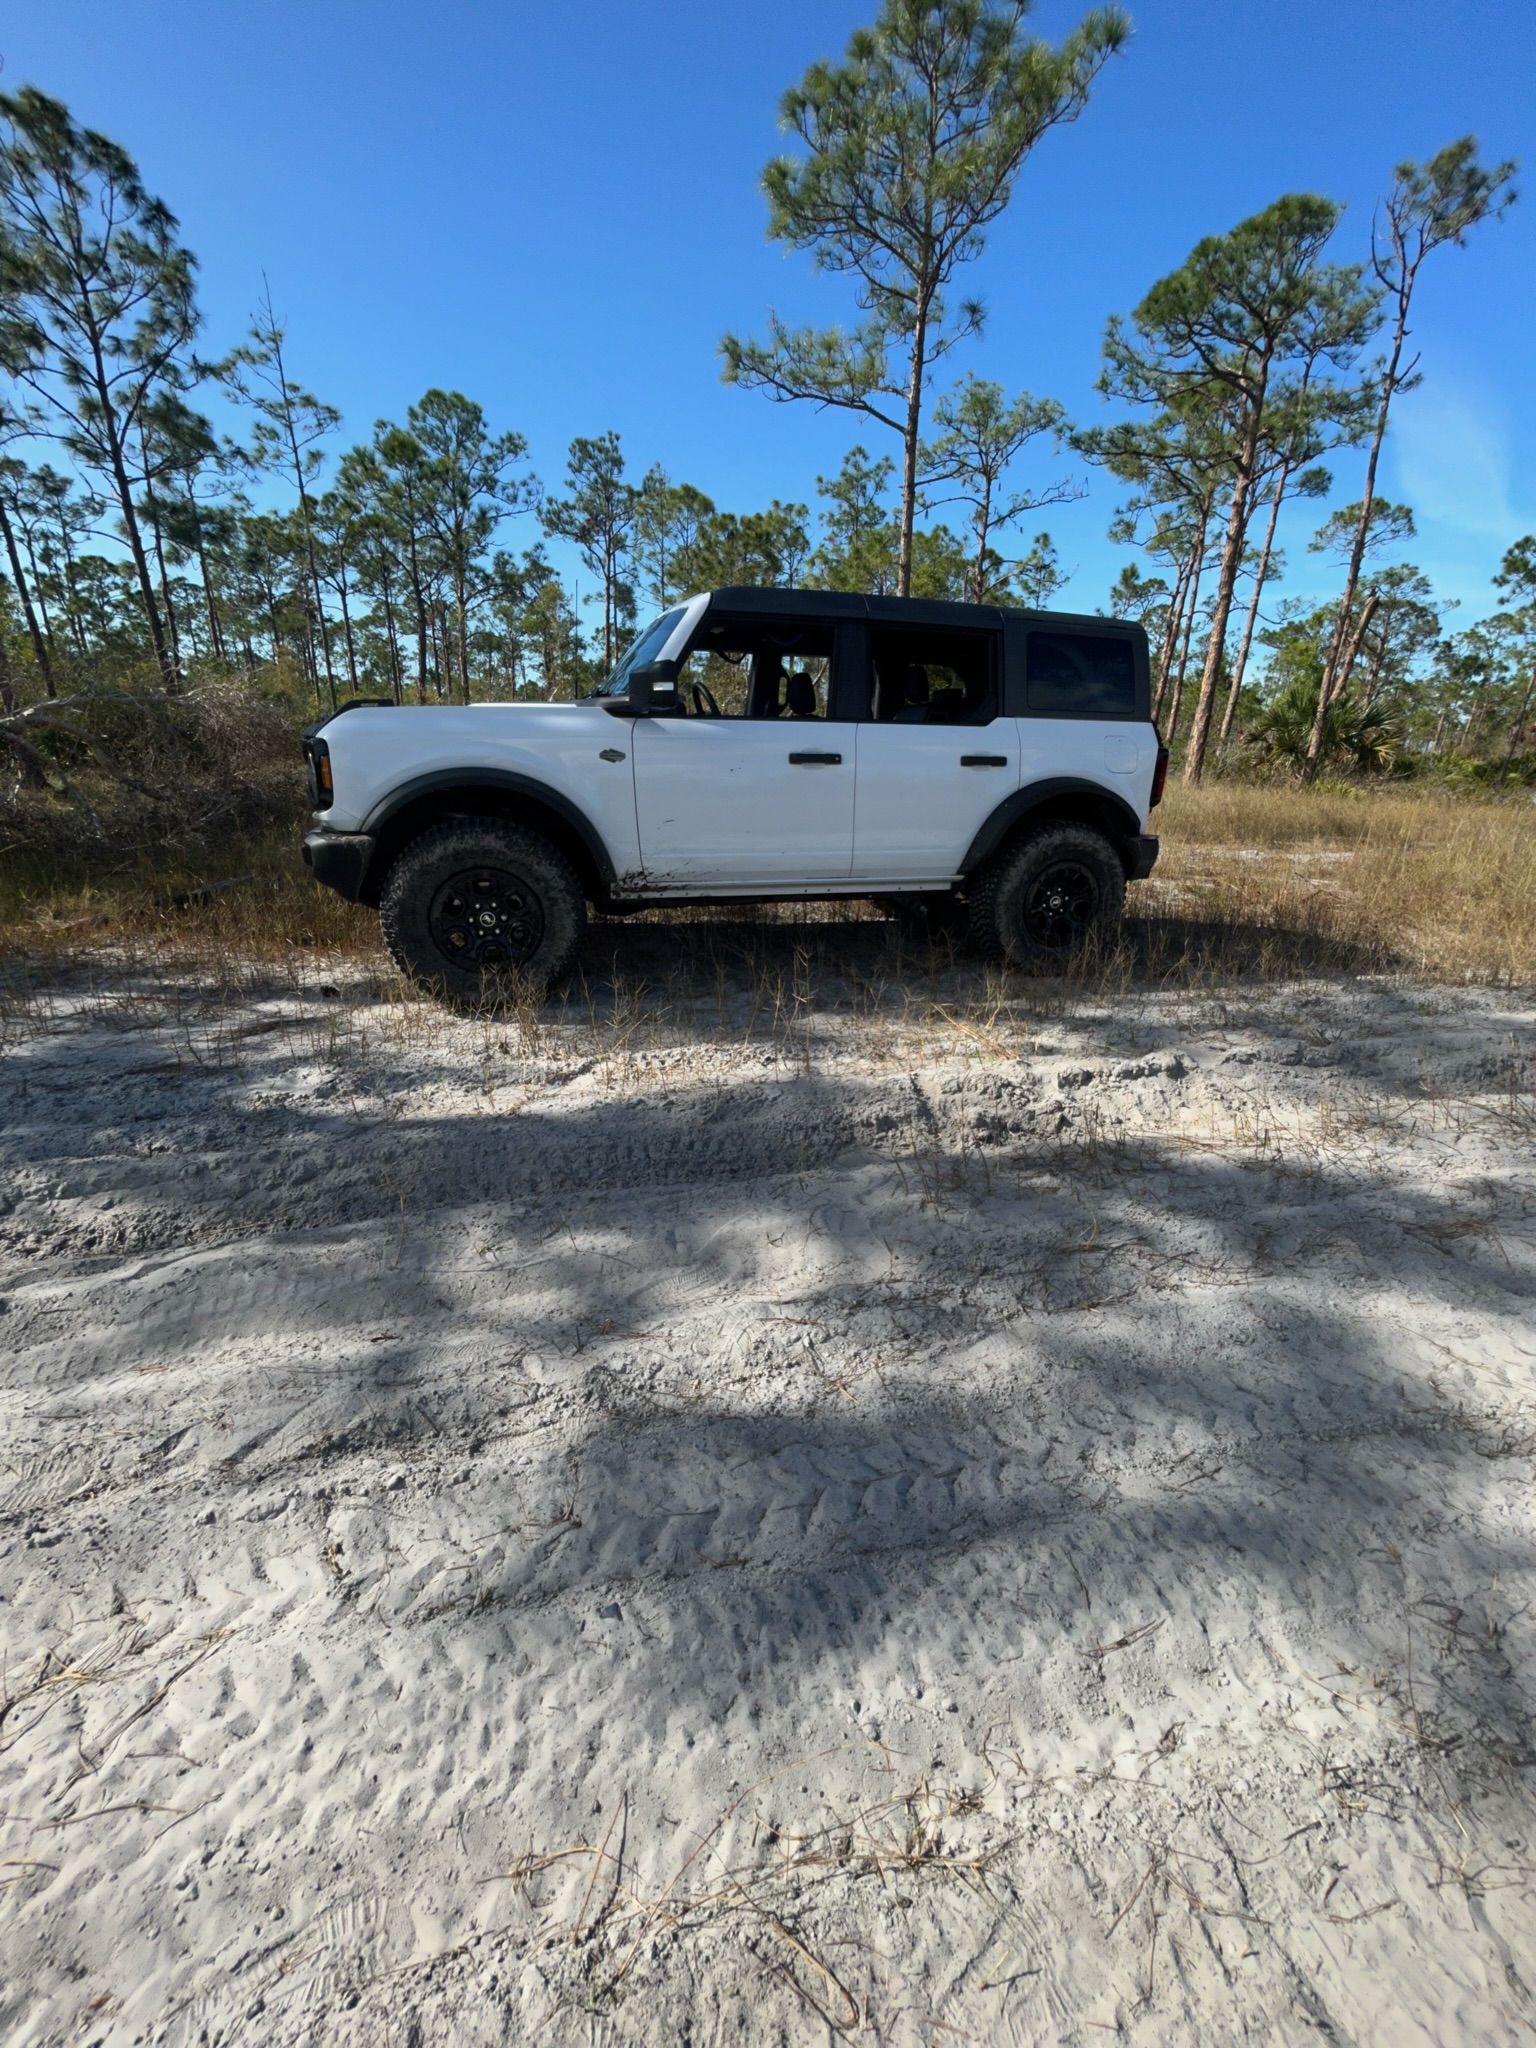 Ford Bronco New Years weekend mini ride - our first real Bronco run D9B3AE3F-658D-462A-8AB4-DBB955810D2F